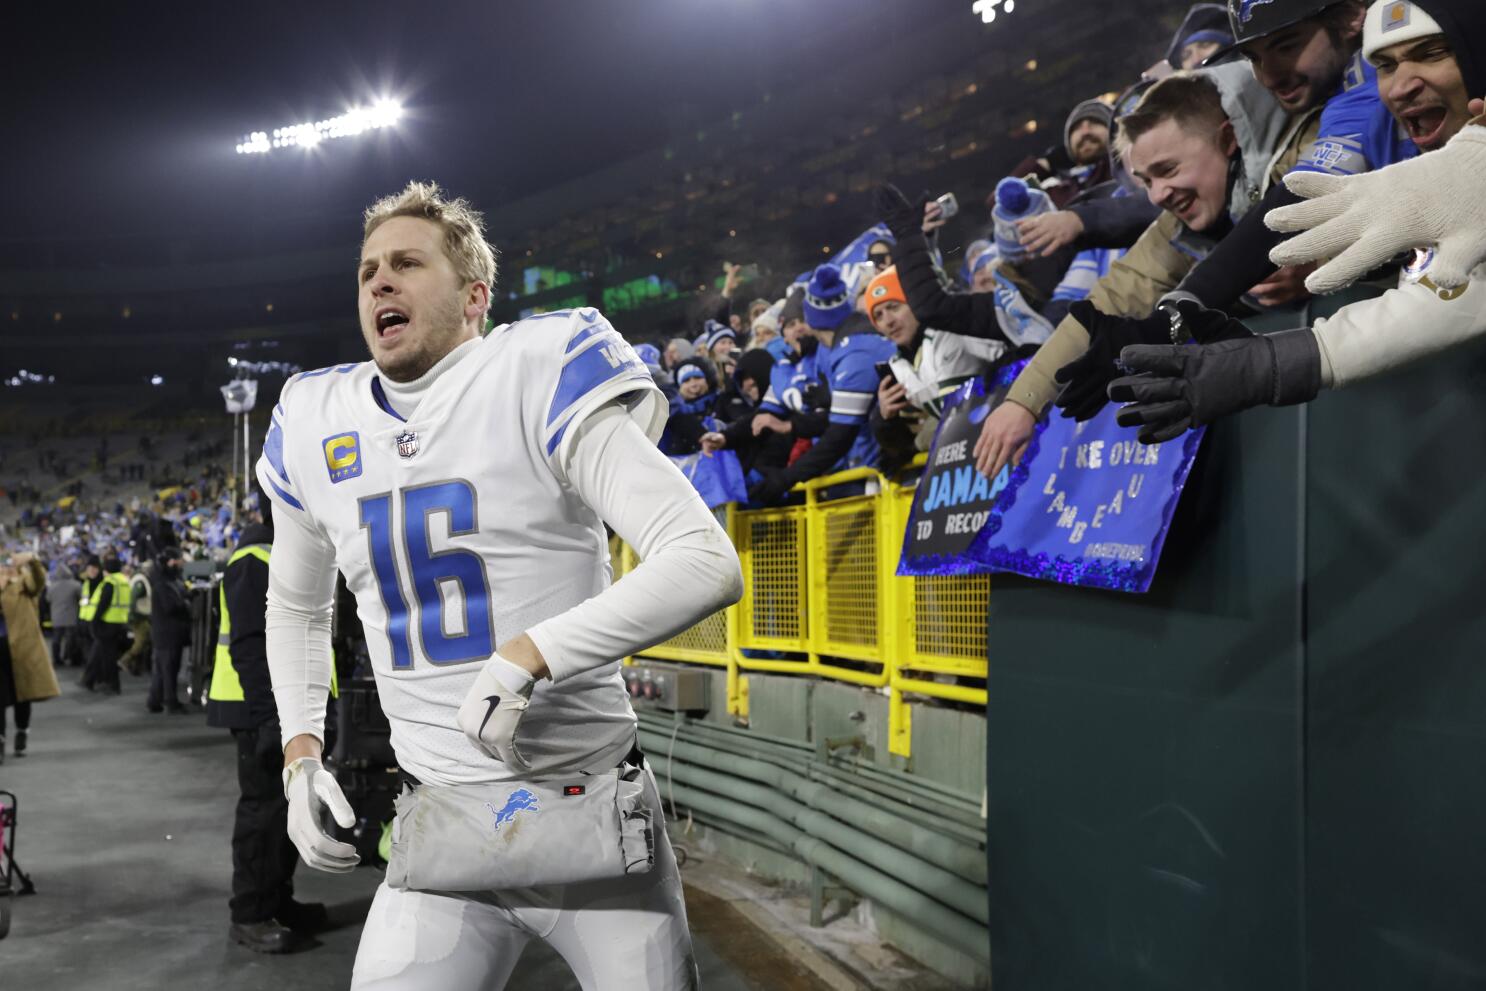 Lions miss playoffs, but head into offseason with optimism - The